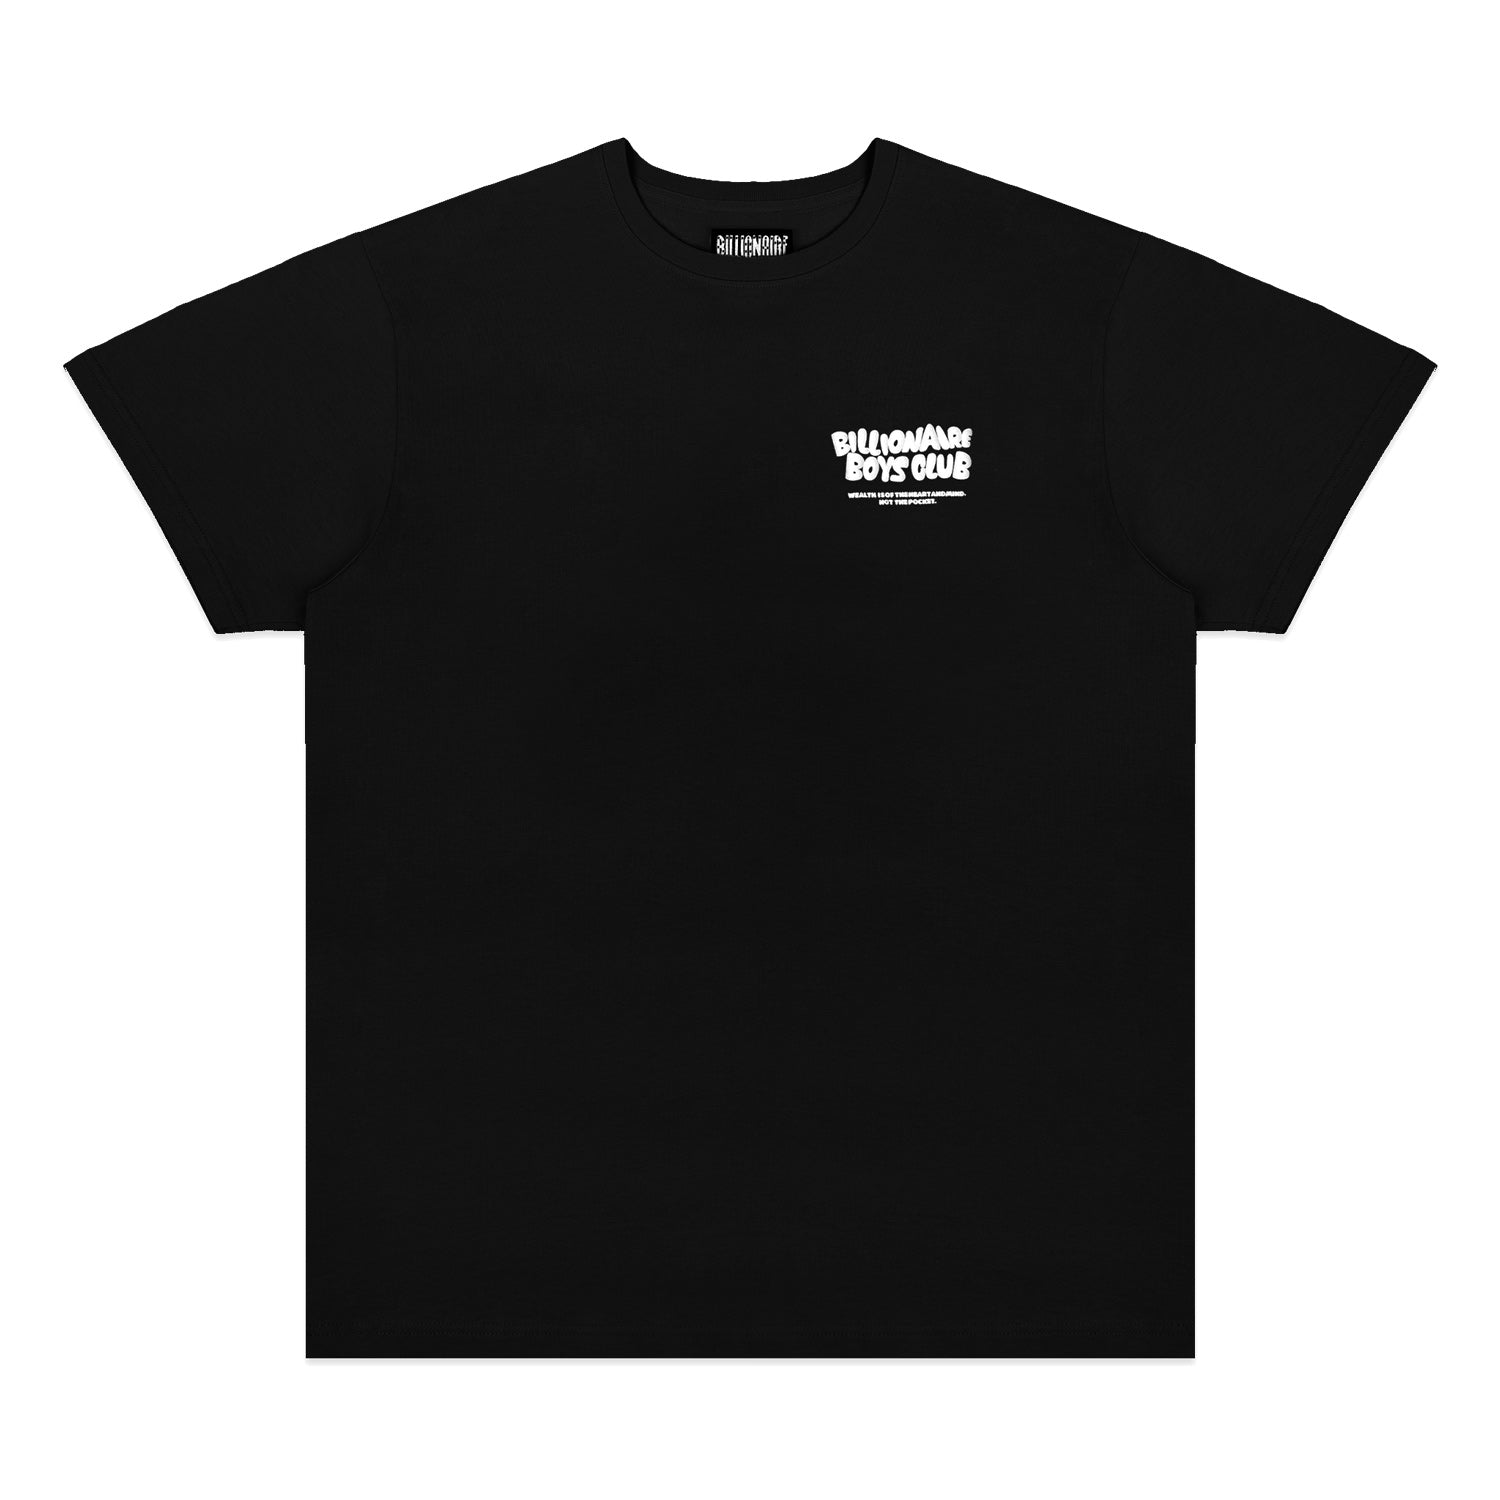 Choosing a selection results in a full page refresh BB Comets SS Tee Black - T-SHIRTS - Canada